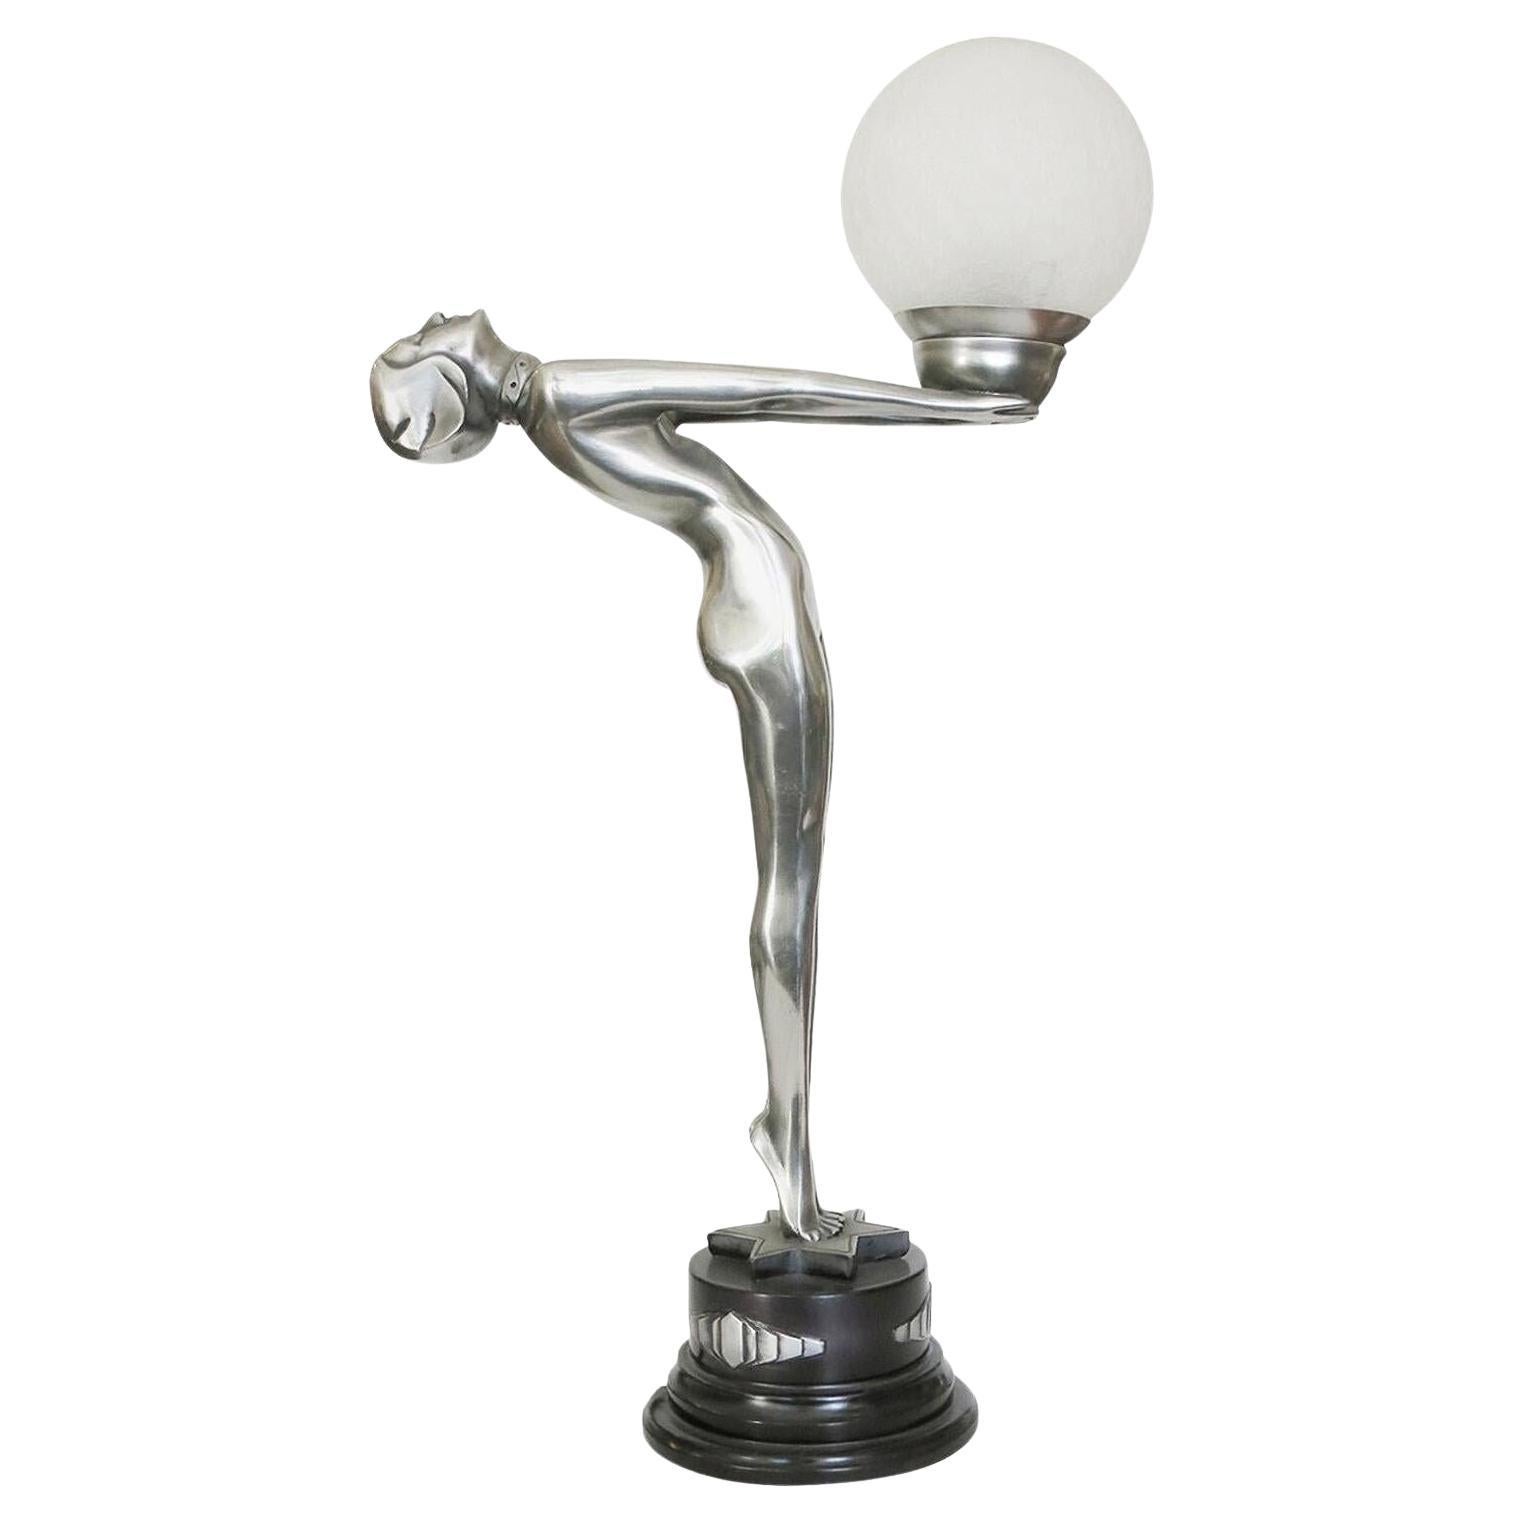 Silver Art Deco Biba Style Lamp Fashioned after "Clarté" by Max Le Verrier